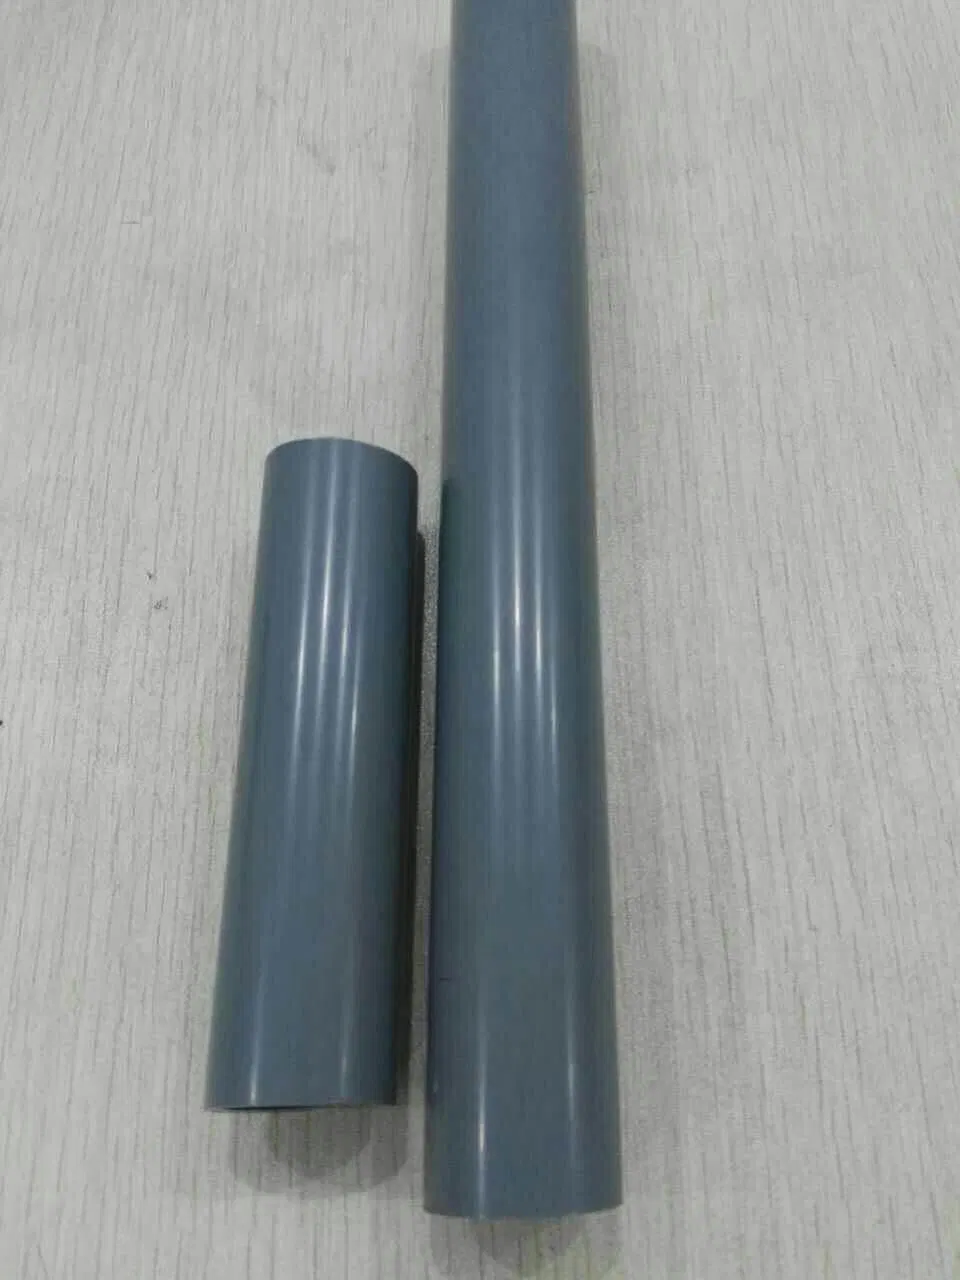 CPVC Plastic Compound for CPVC Fittings/ Valves